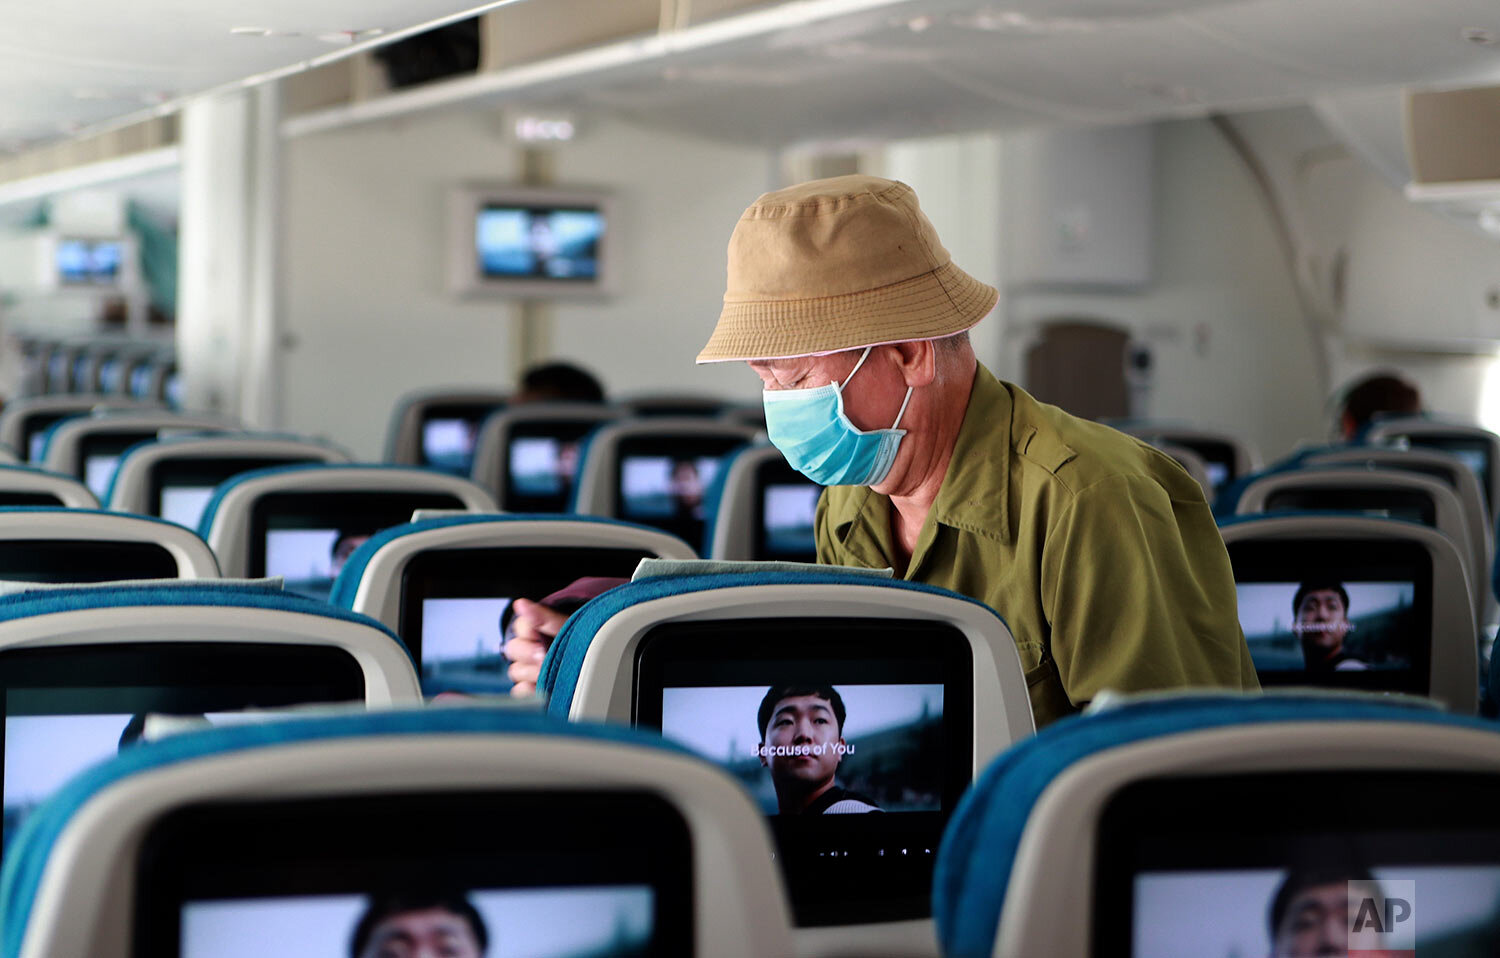  A man boards a plane in Ho Chi Minh City, Vietnam on Monday, March 16, 2020. (AP Photo/Hau Dinh) 